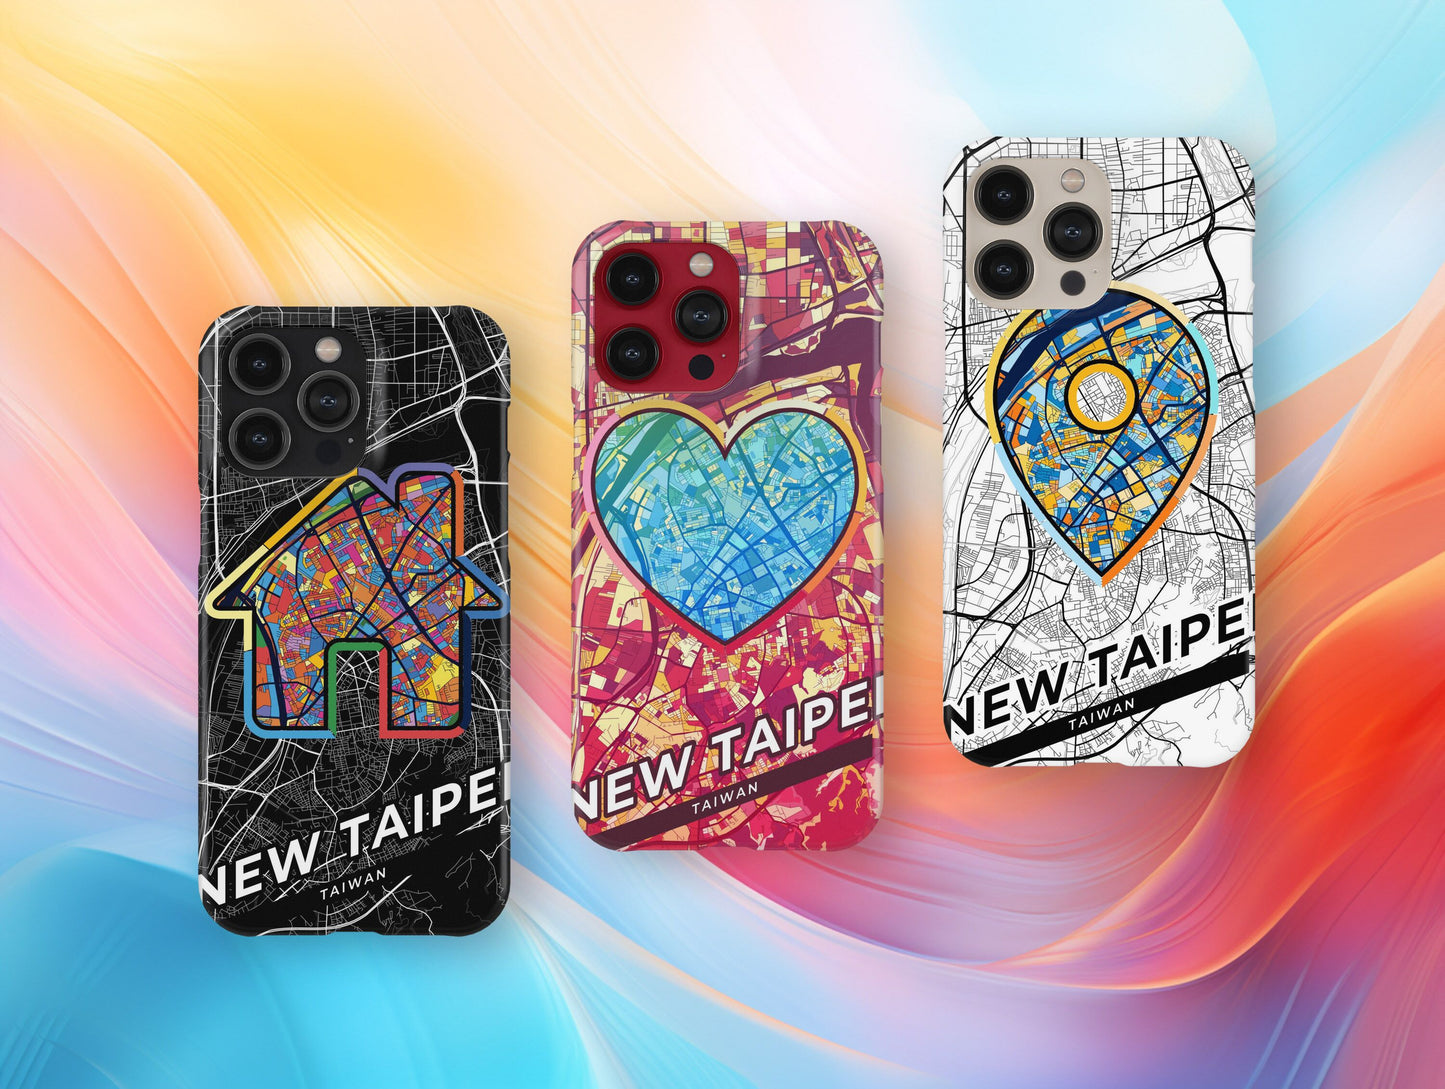 New Taipei Taiwan slim phone case with colorful icon